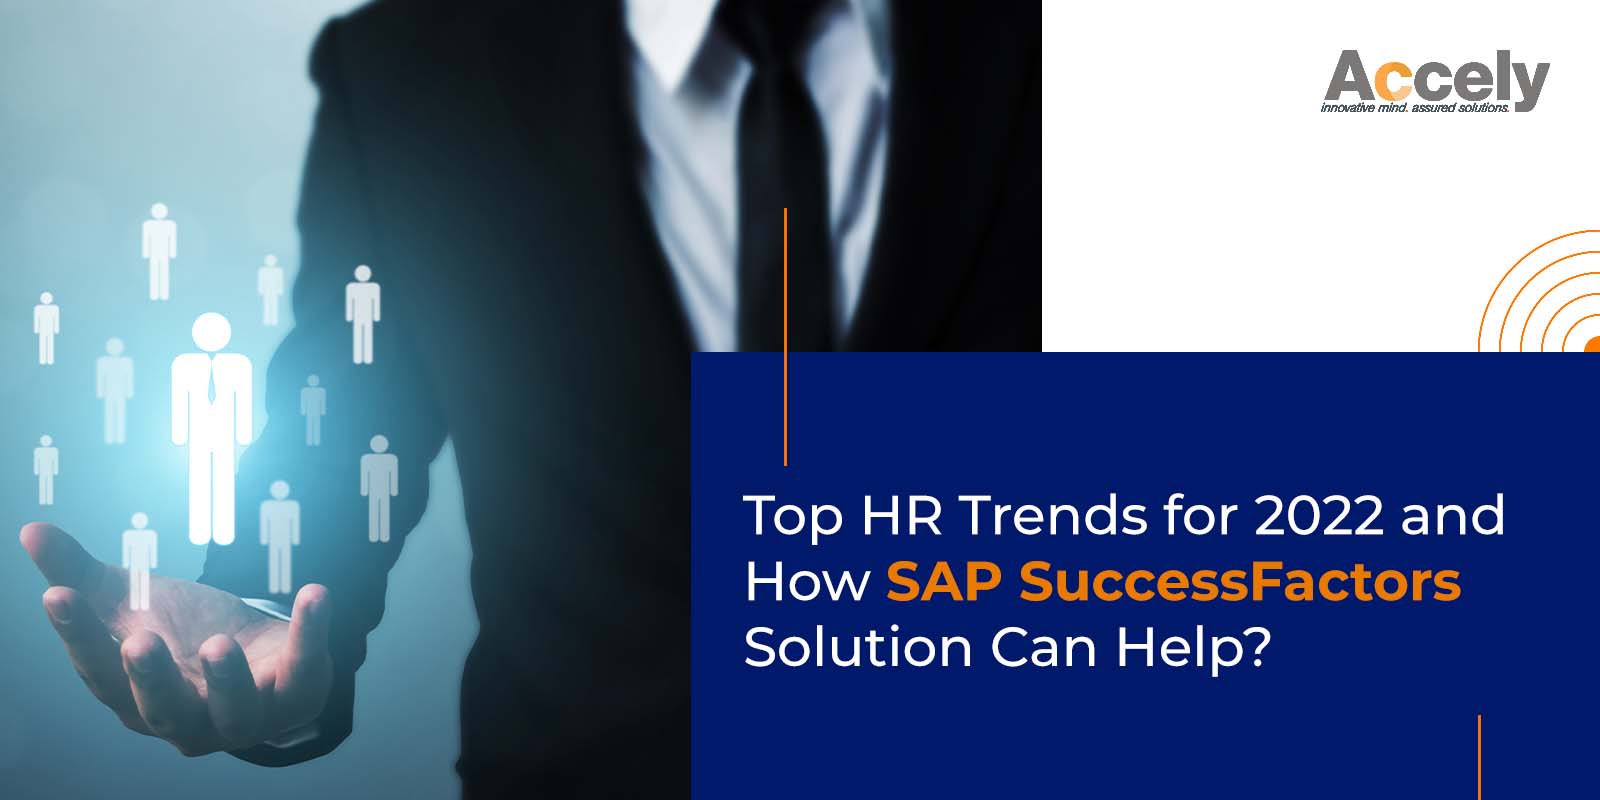 Top HR Trends for 2022 and How SAP SuccessFactors Solution Can Help?